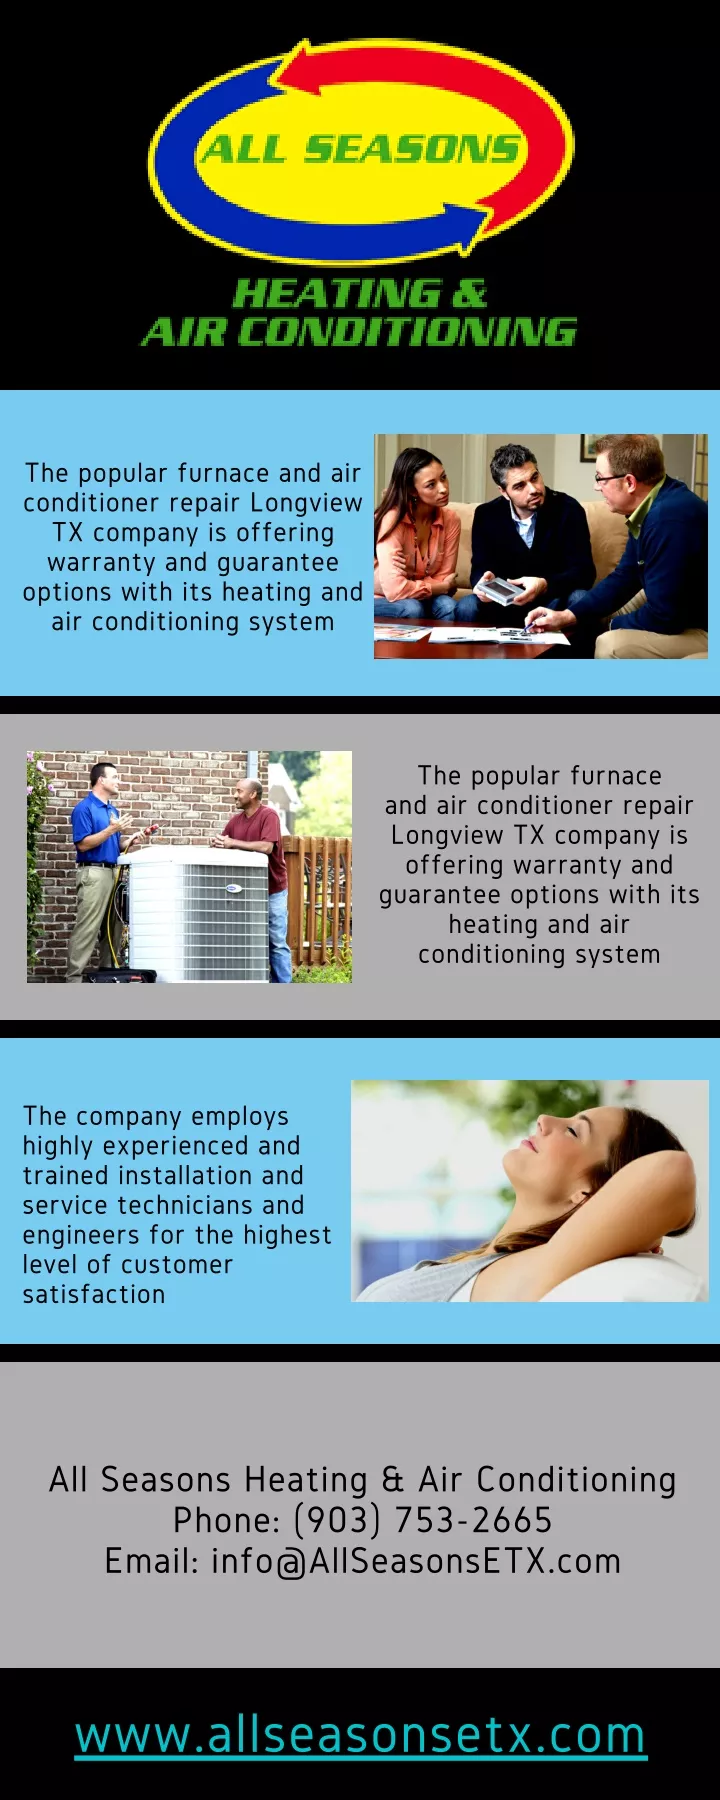 the popular furnace and air conditioner repair